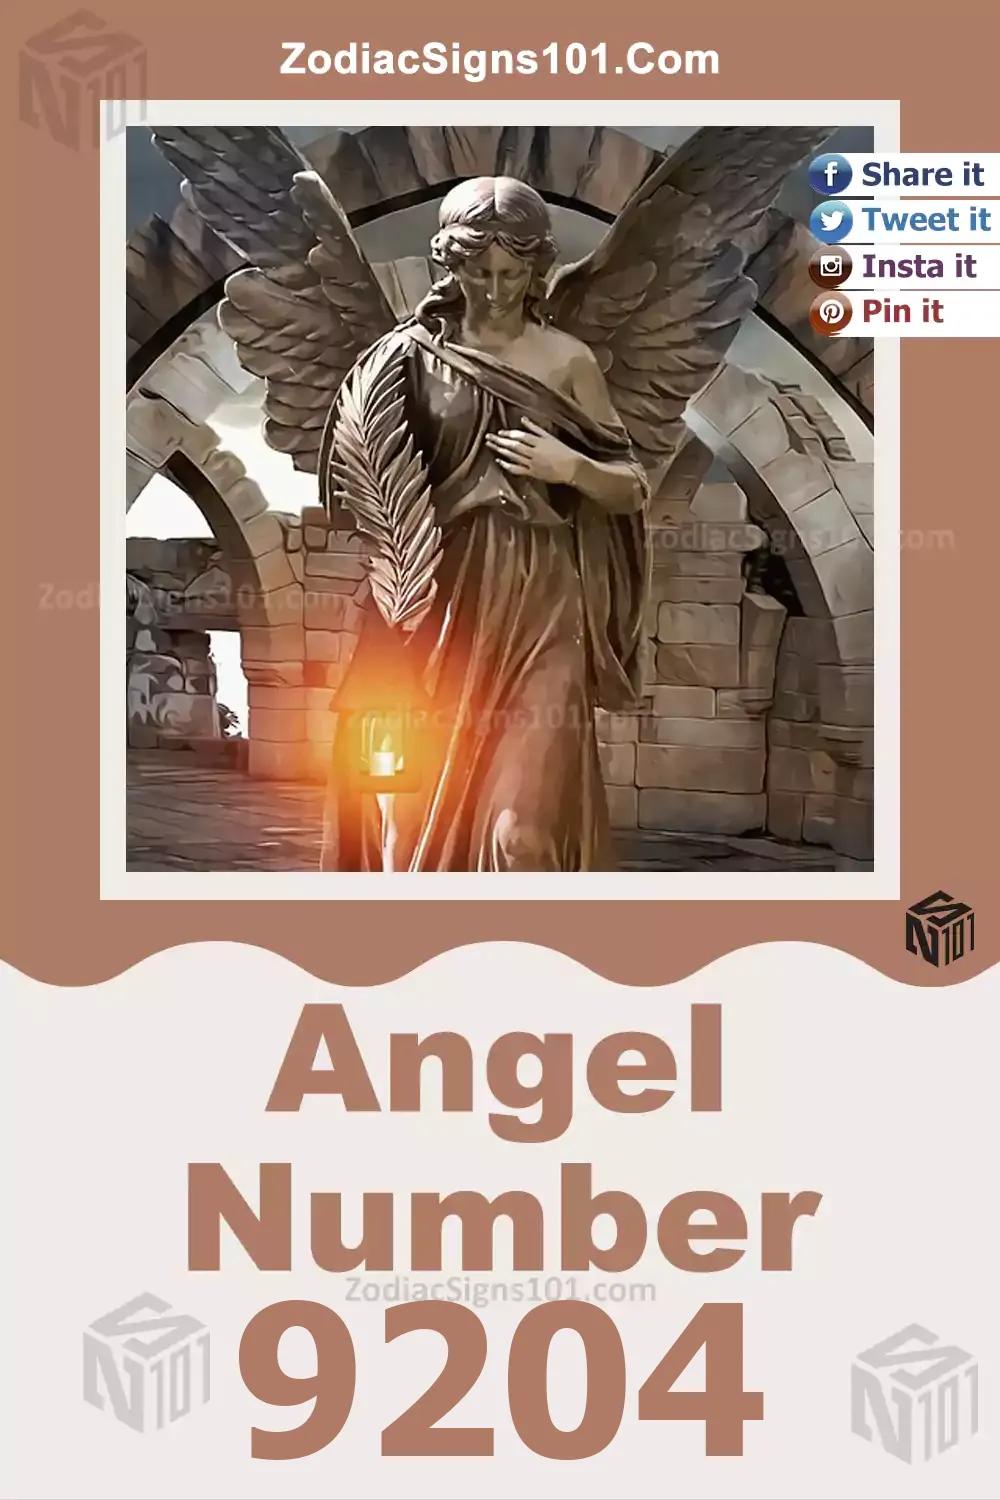 9204 Angel Number Meaning